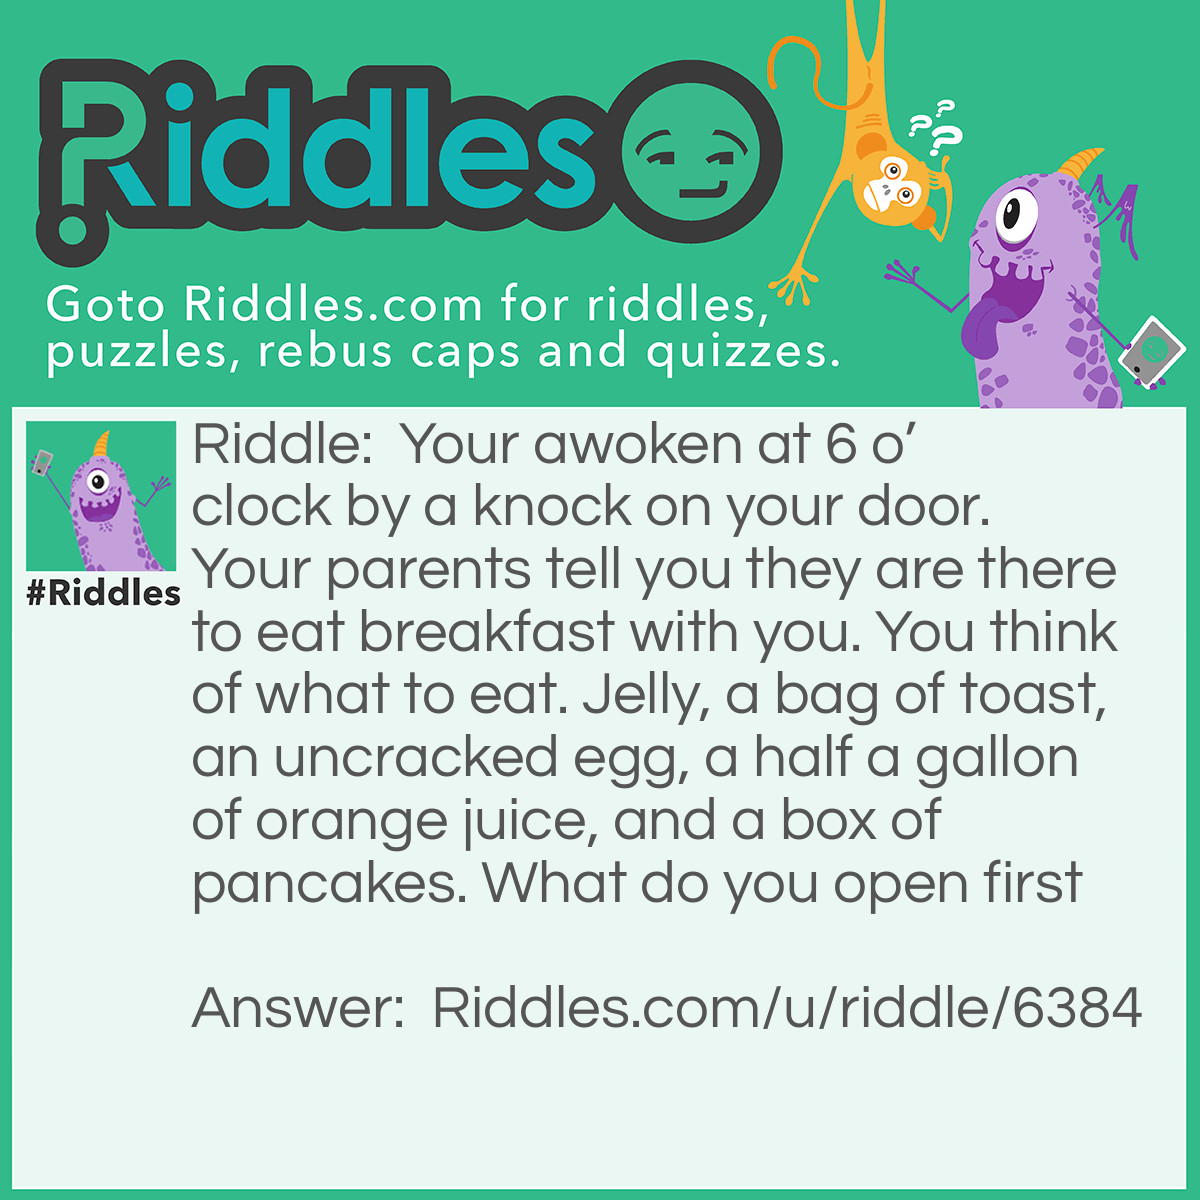 Riddle: Your awoken at 6 o'clock by a knock on your door. Your parents tell you they are there to eat breakfast with you. You think of what to eat. Jelly, a bag of toast, an uncracked egg, a half a gallon of orange juice, and a box of pancakes. What do you open first Answer: The door.